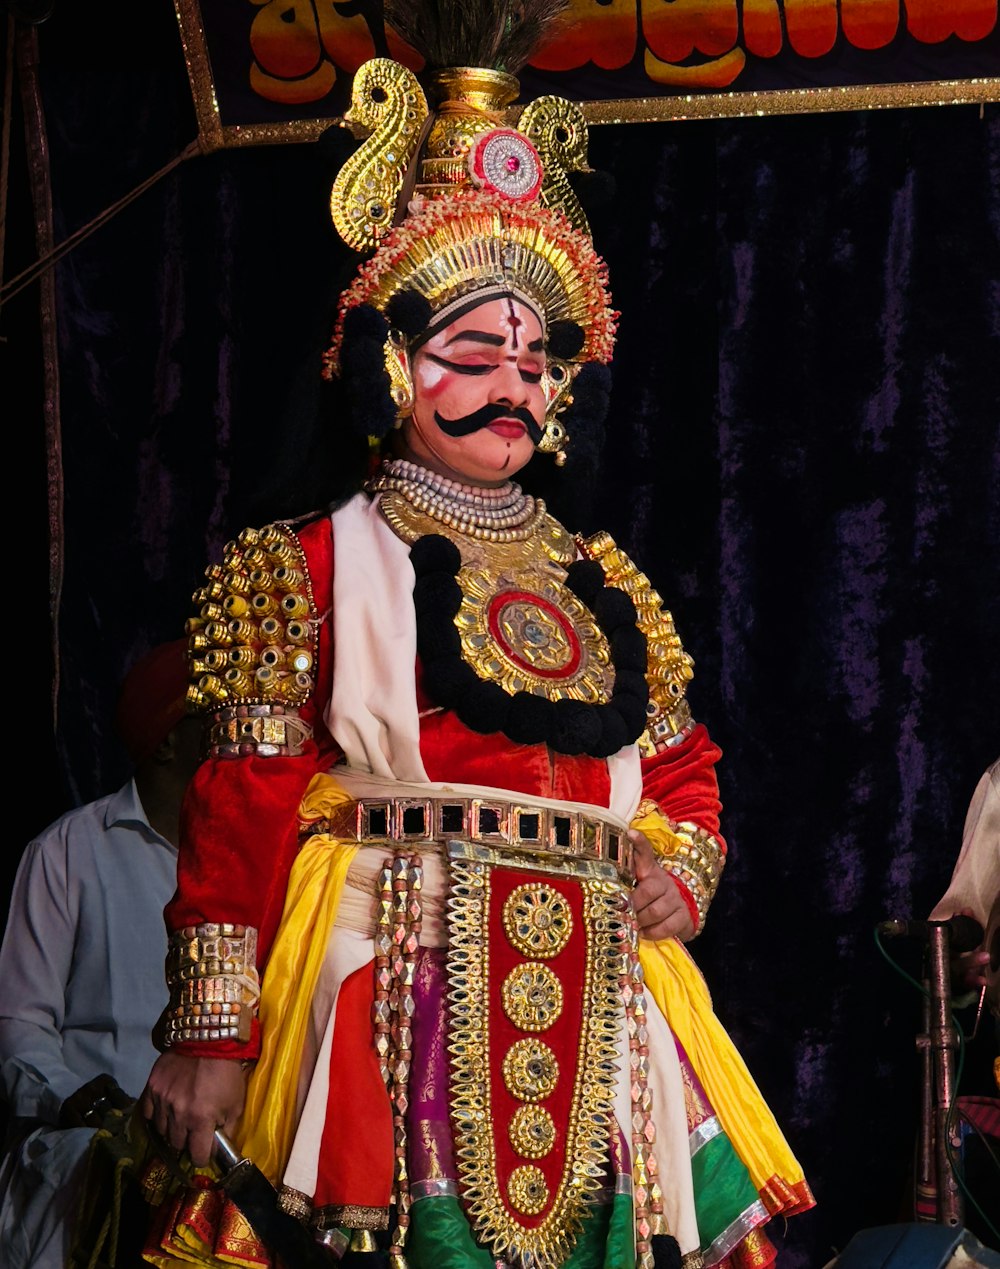 a man dressed in a colorful costume standing in front of a stage